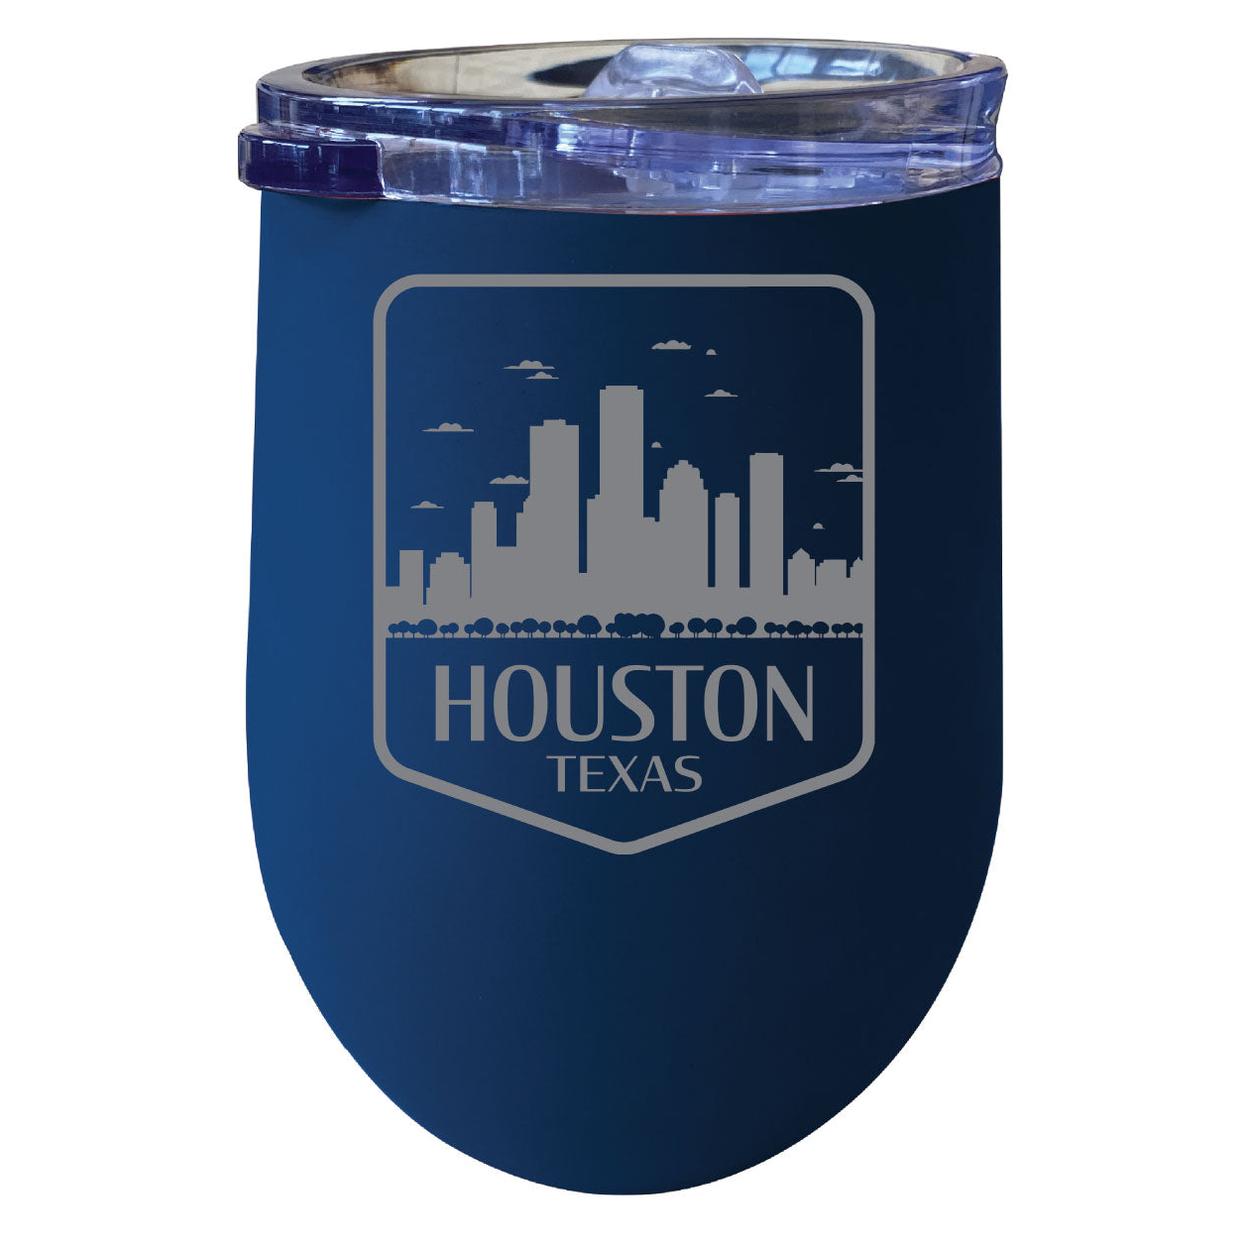 Houston Texas Souvenir 12 Oz Engraved Insulated Wine Stainless Steel Tumbler - Navy,,2-Pack